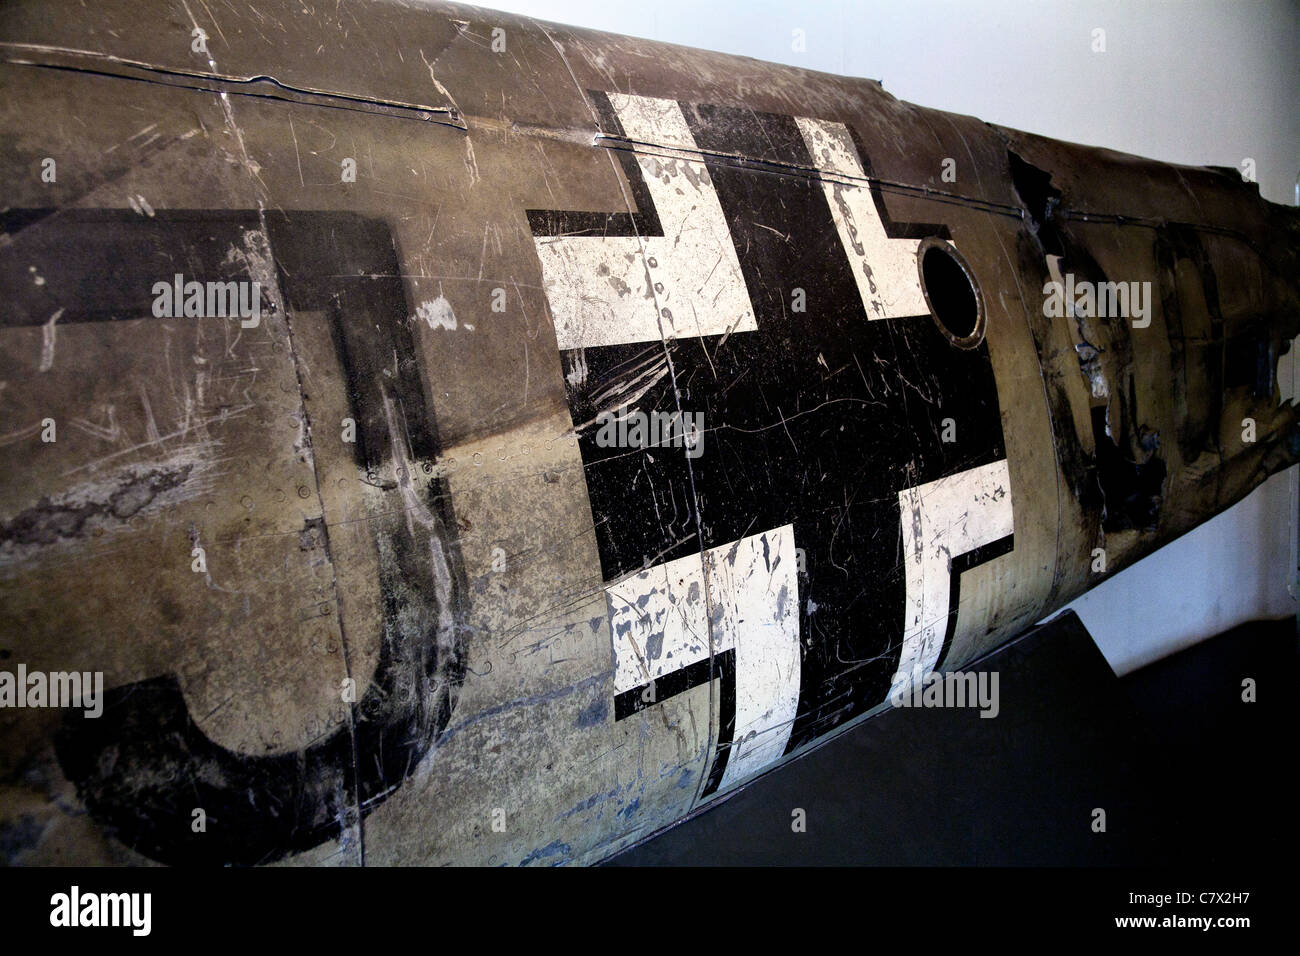 The Luftwaffe Balkenkreuz on the fuselage of a crashed German WW2 aircraft. Scratched and distressed markings cover the surface. Stock Photo